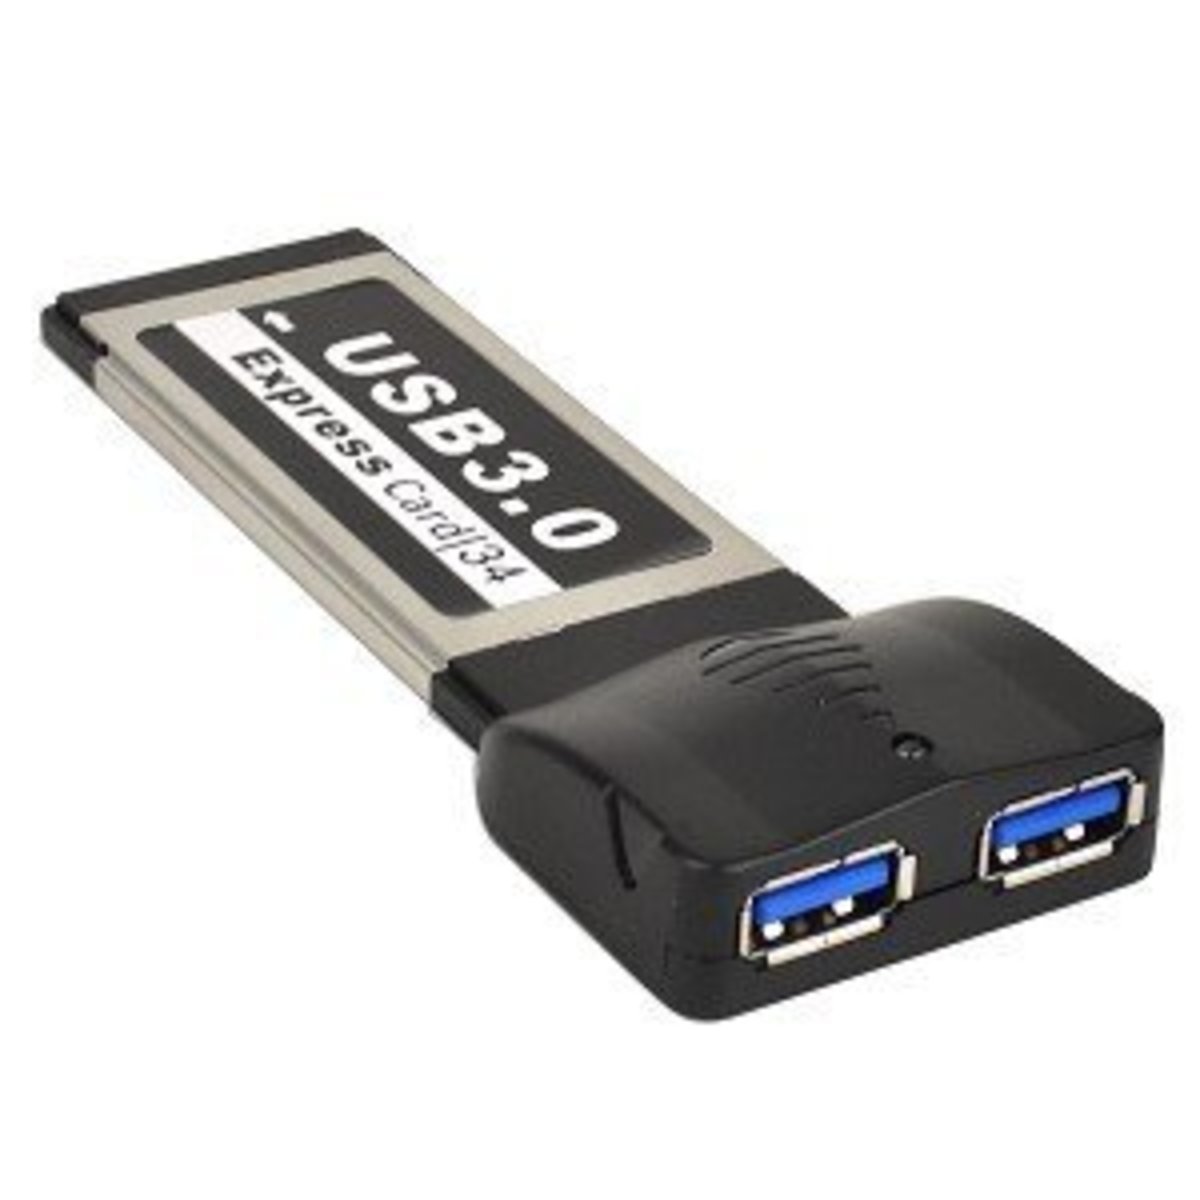 ExpressCard for Laptops with USB 3.0 ports.